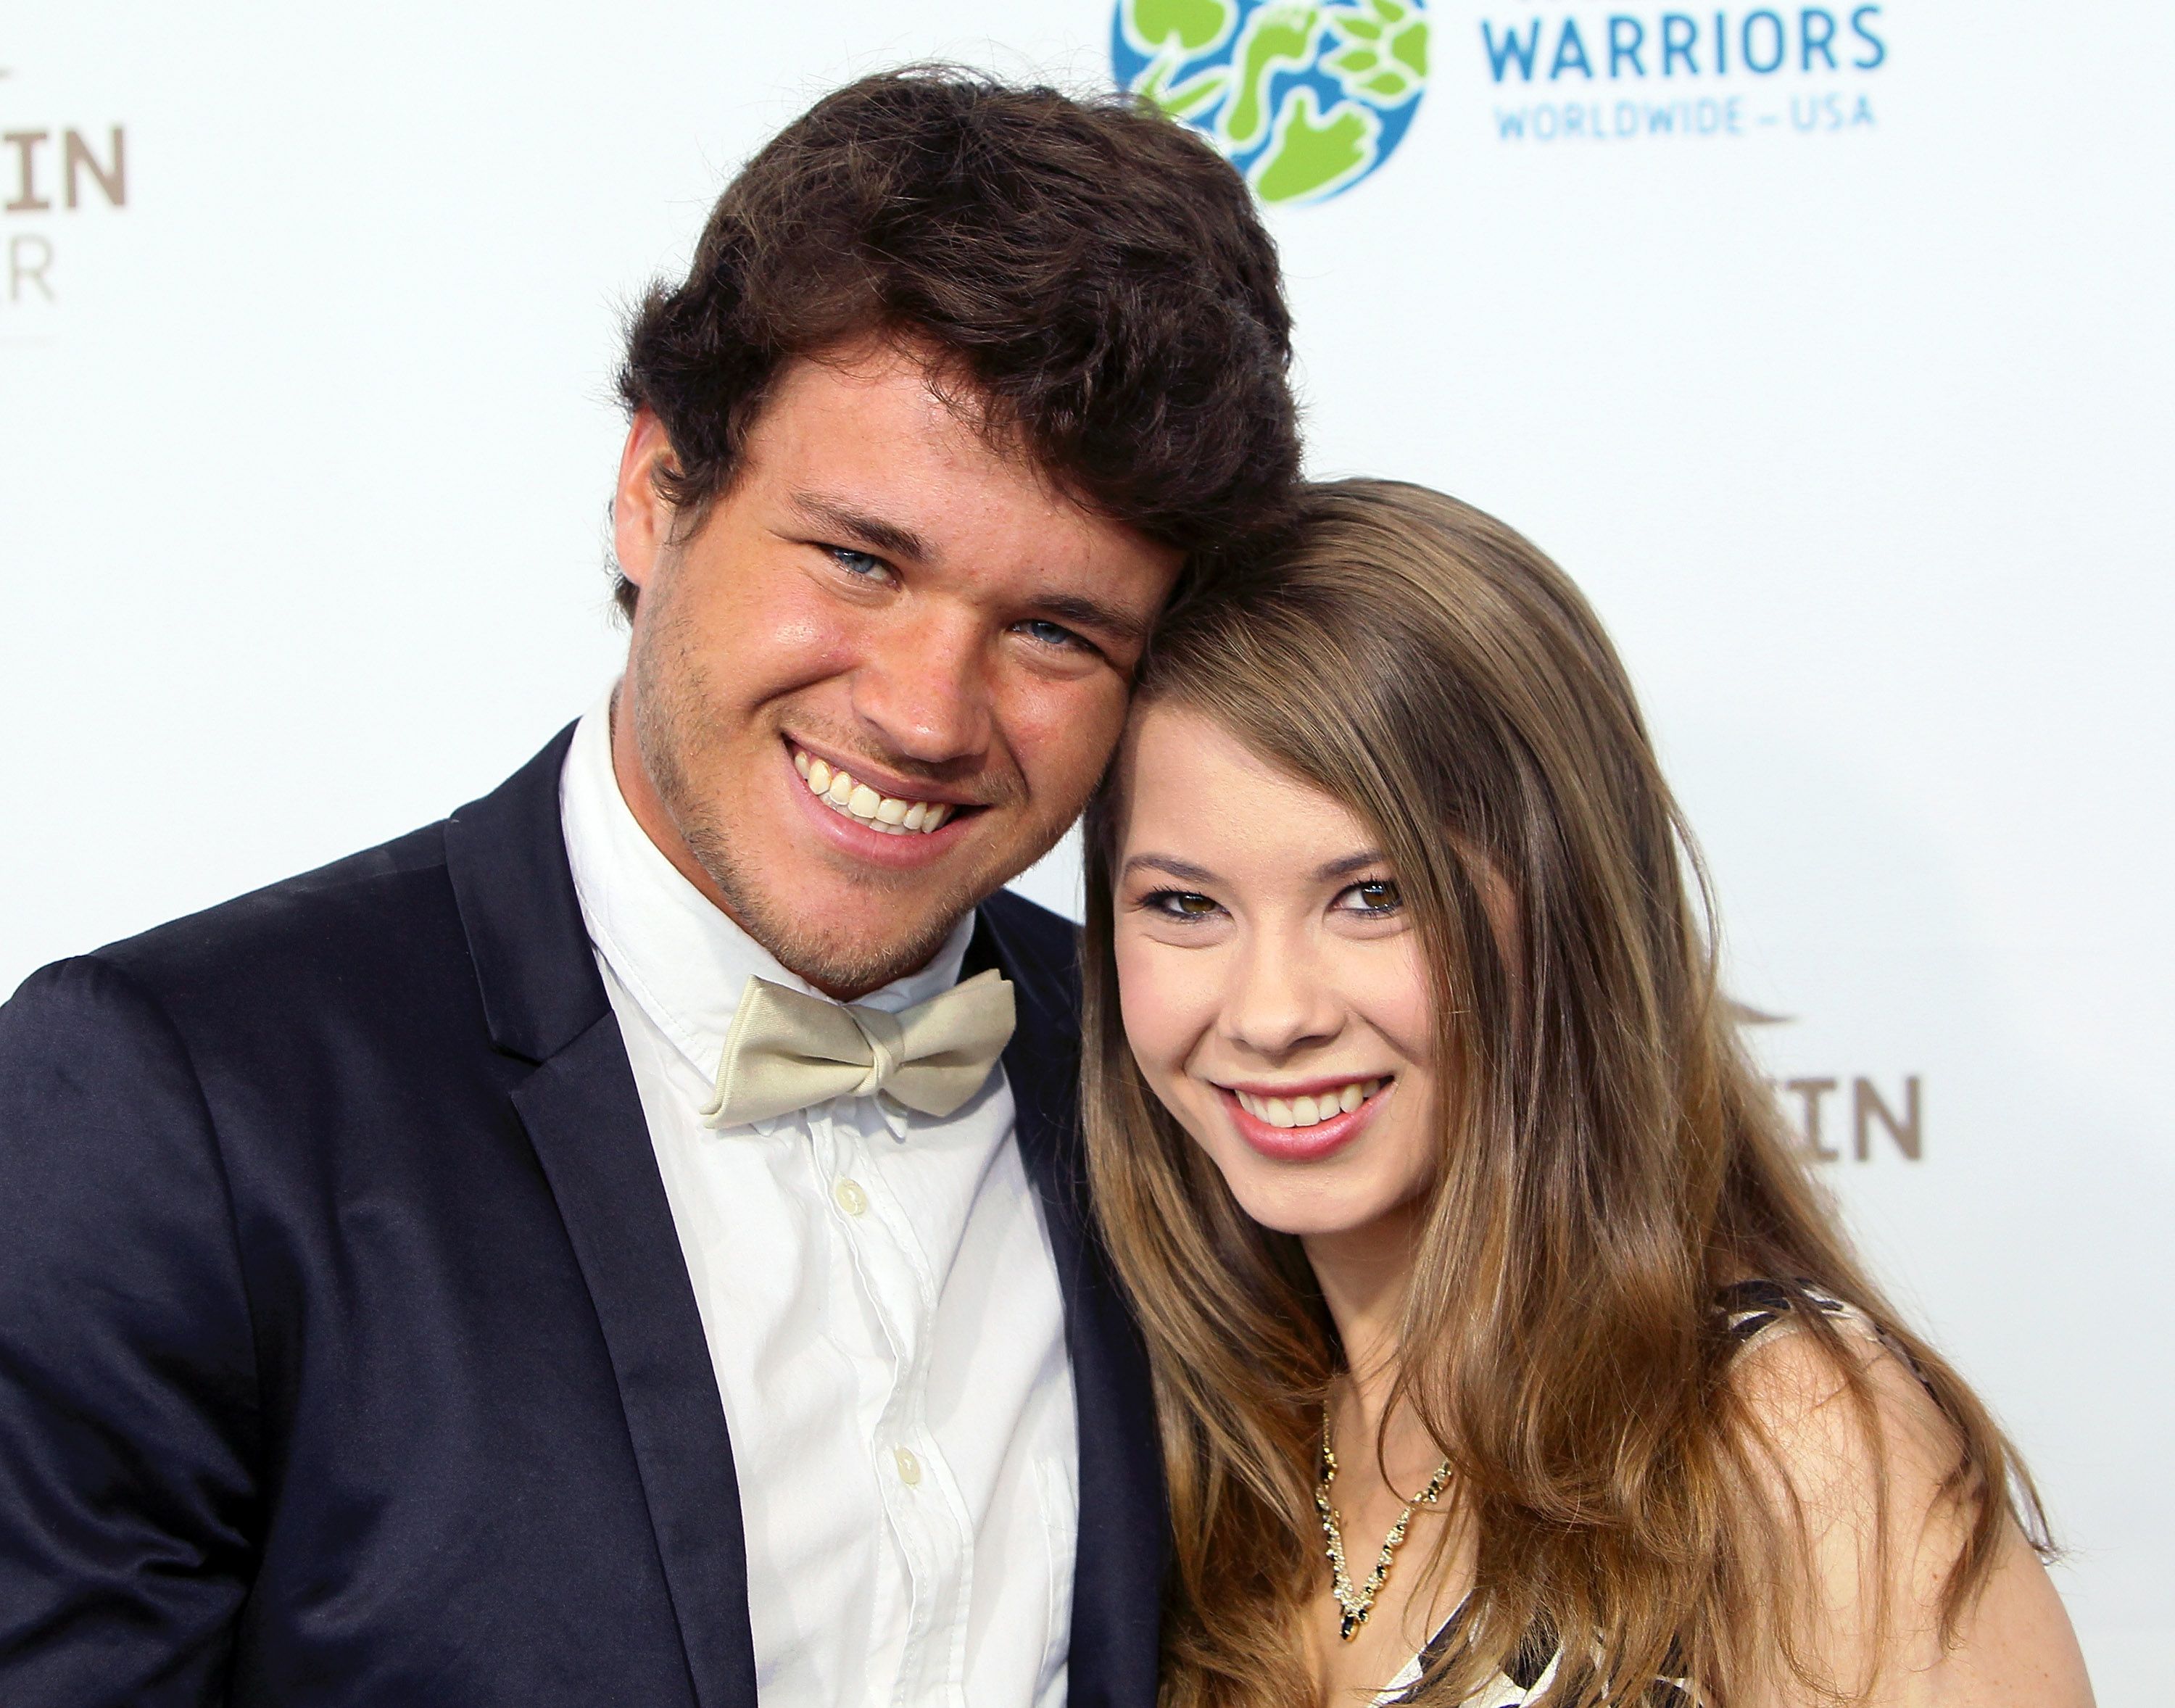 Chandler Powell and Bindi Irwin attend the Steve Irwin Gala Dinner at JW Marriott Los Angeles on May 21, 2016 | Photo: Getty Images